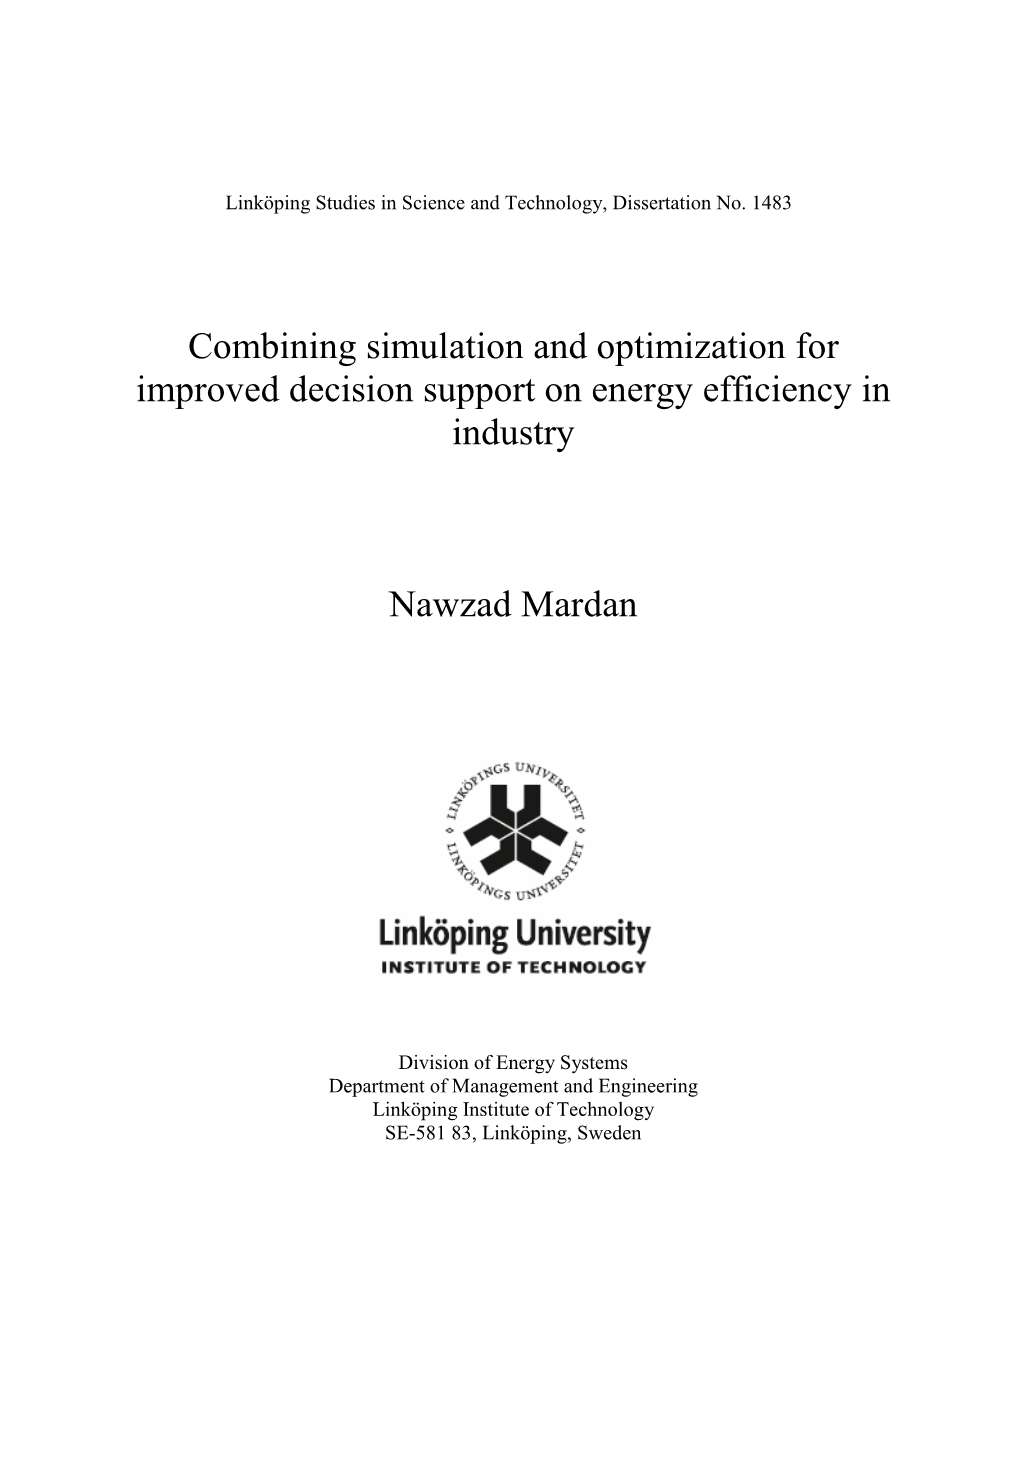 Combining Simulation and Optimization for Improved Decision Support on Energy Efficiency in Industry